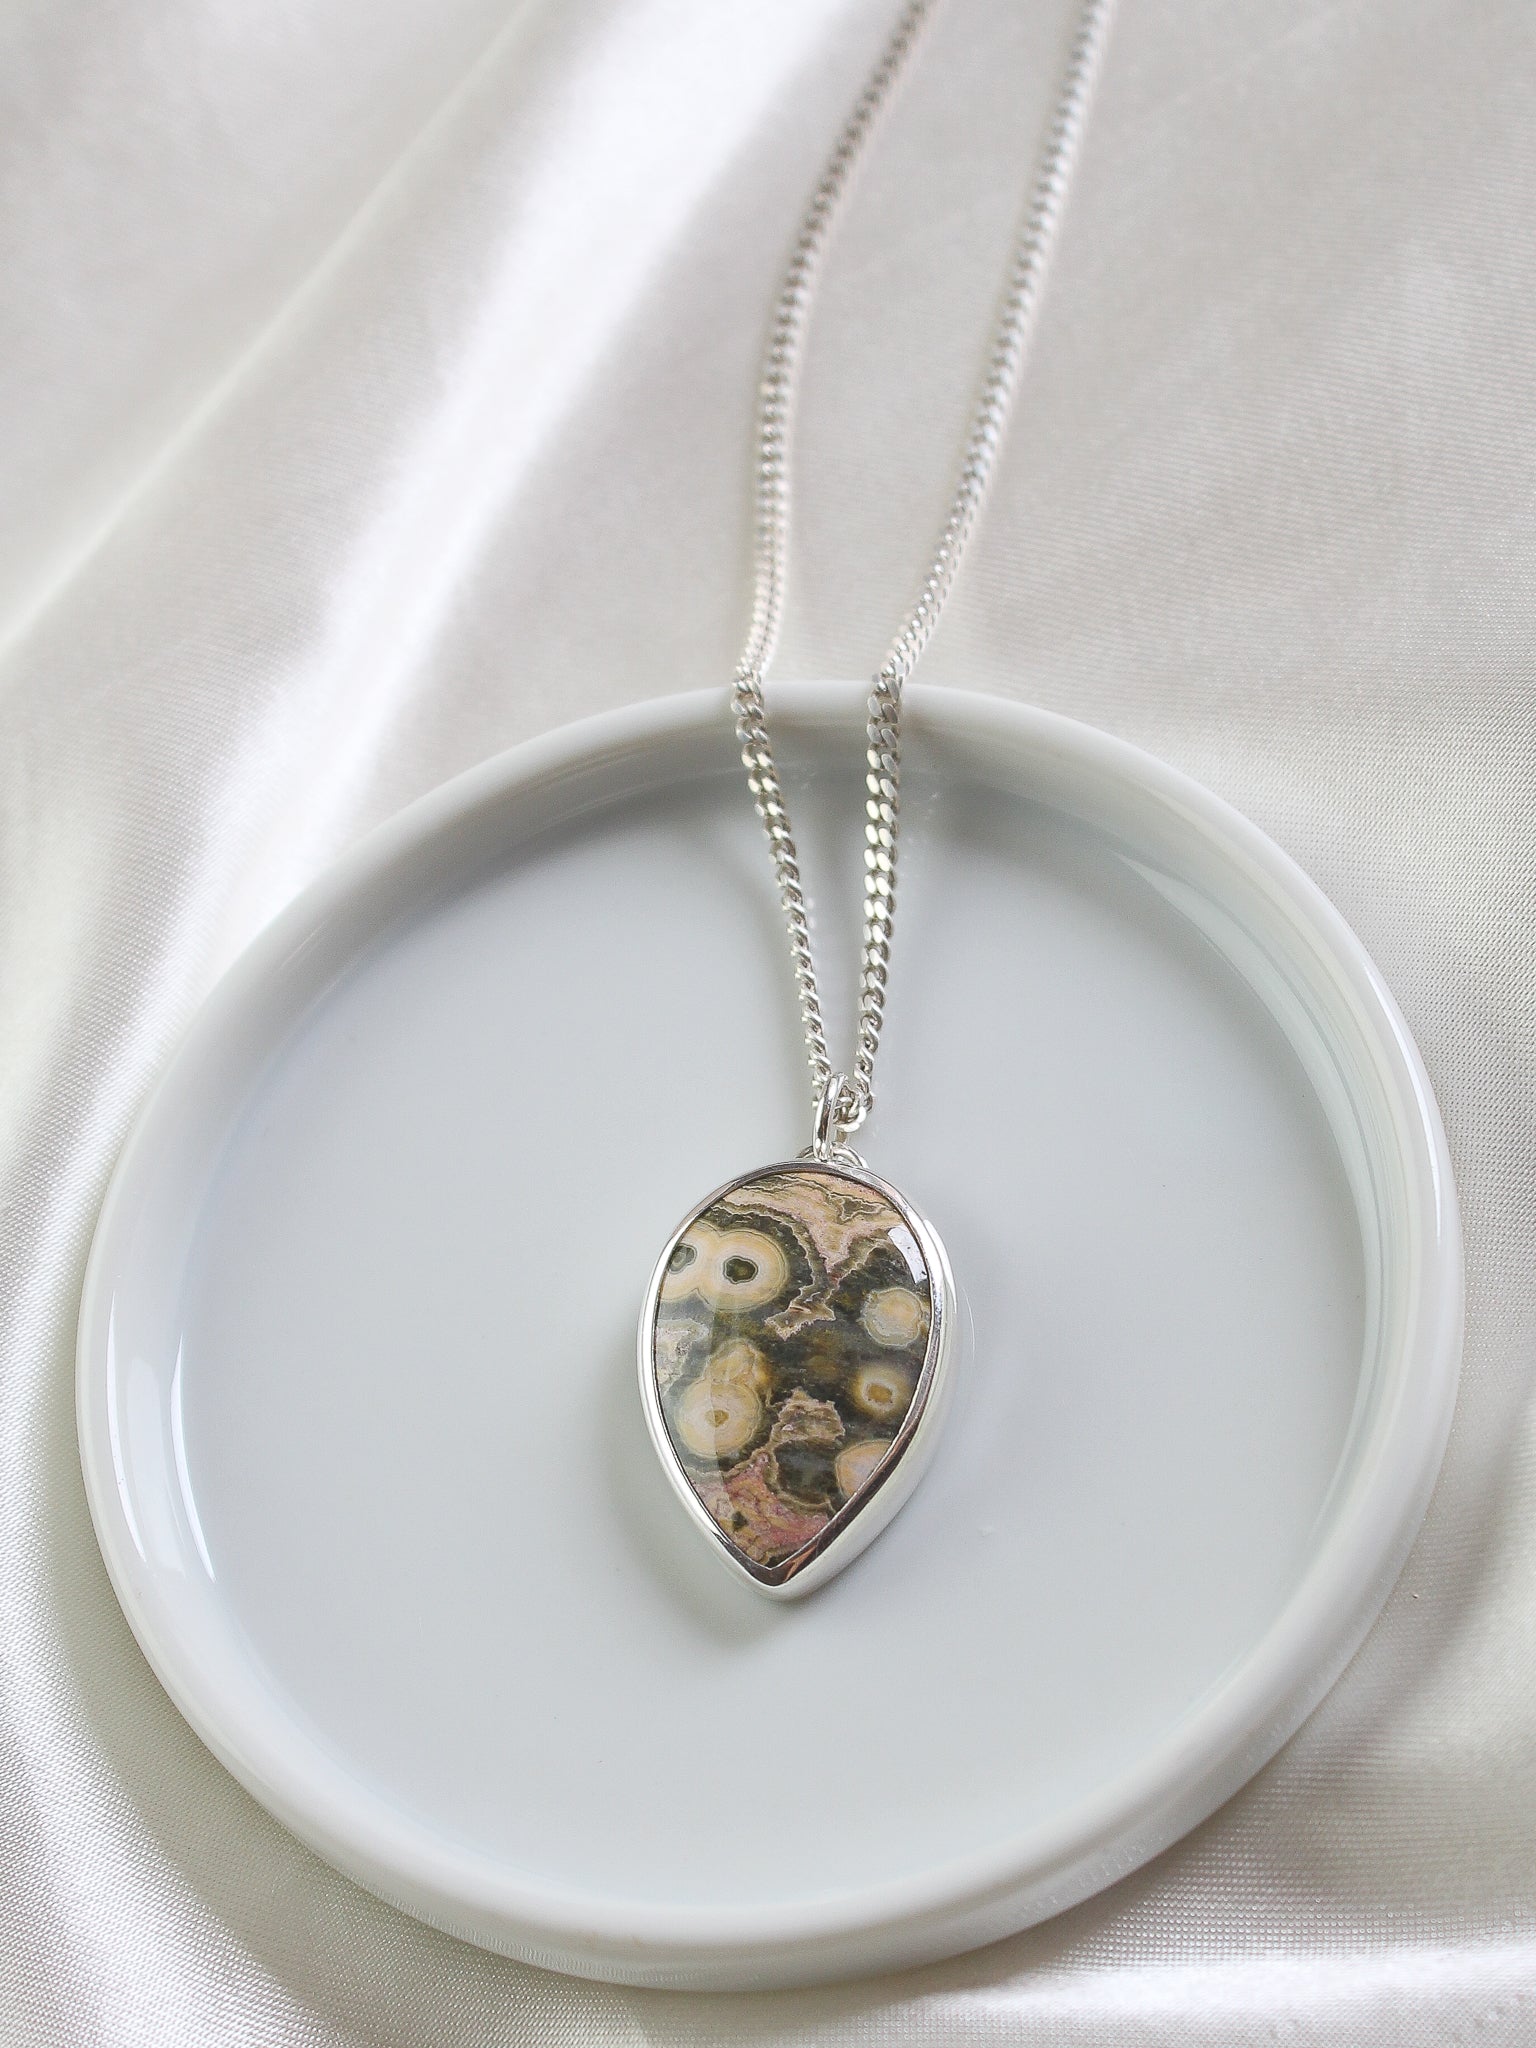 Handmade 925 sterling silver pendant with ocean jasper stone lily and William jewelry affordable